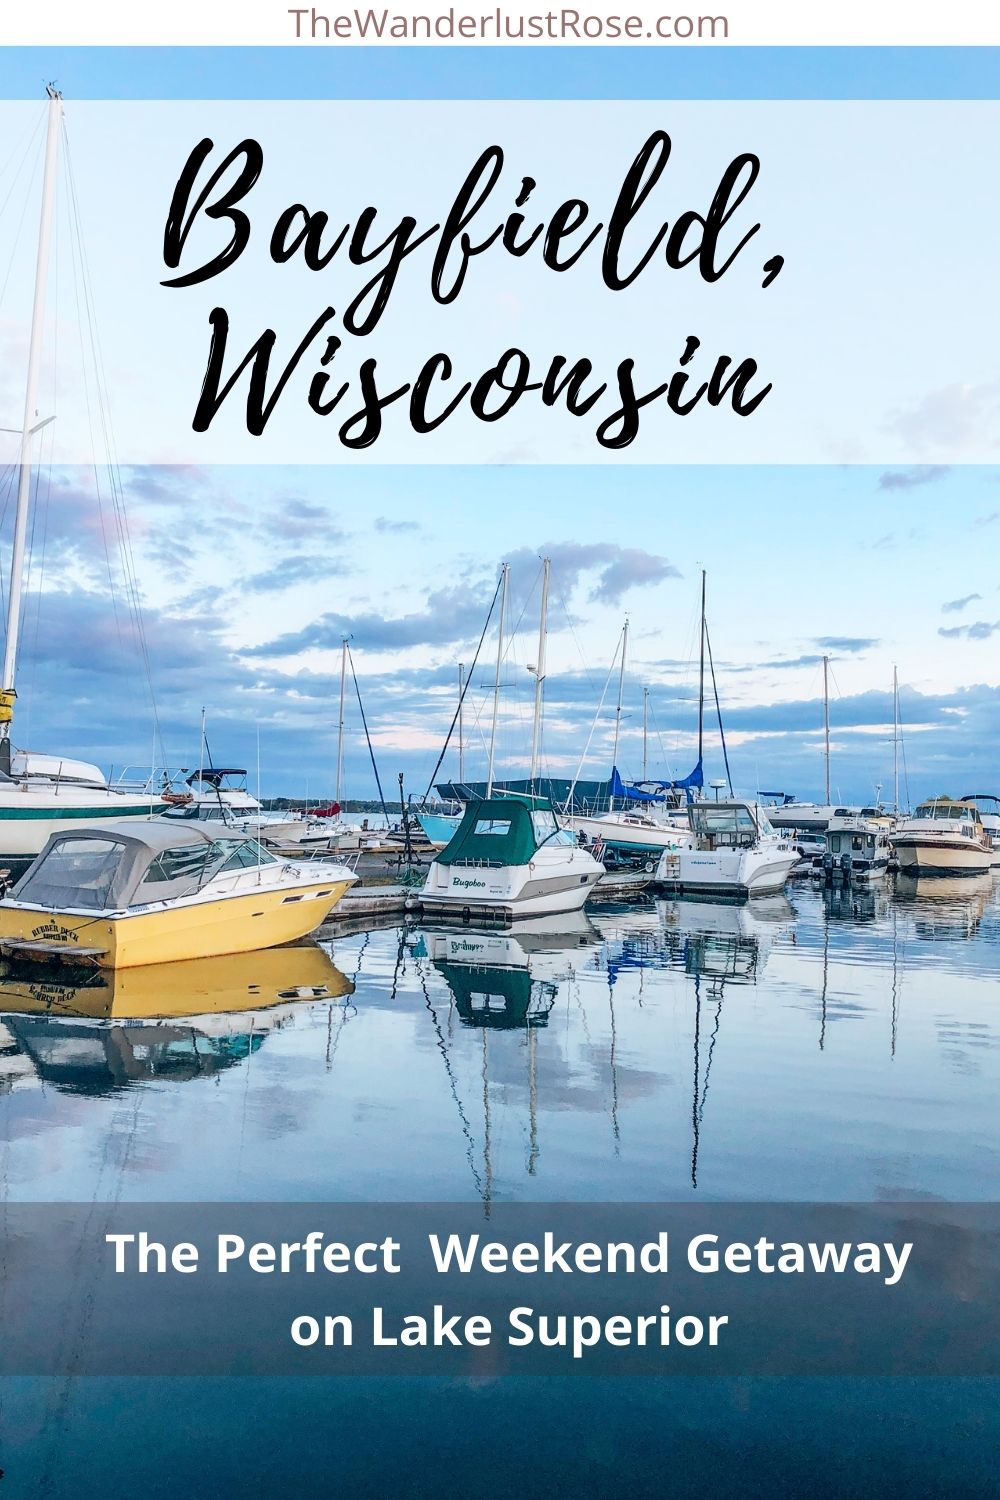 10 Things To Do in Bayfield Wisconsin For The Perfect Weekend Getaway